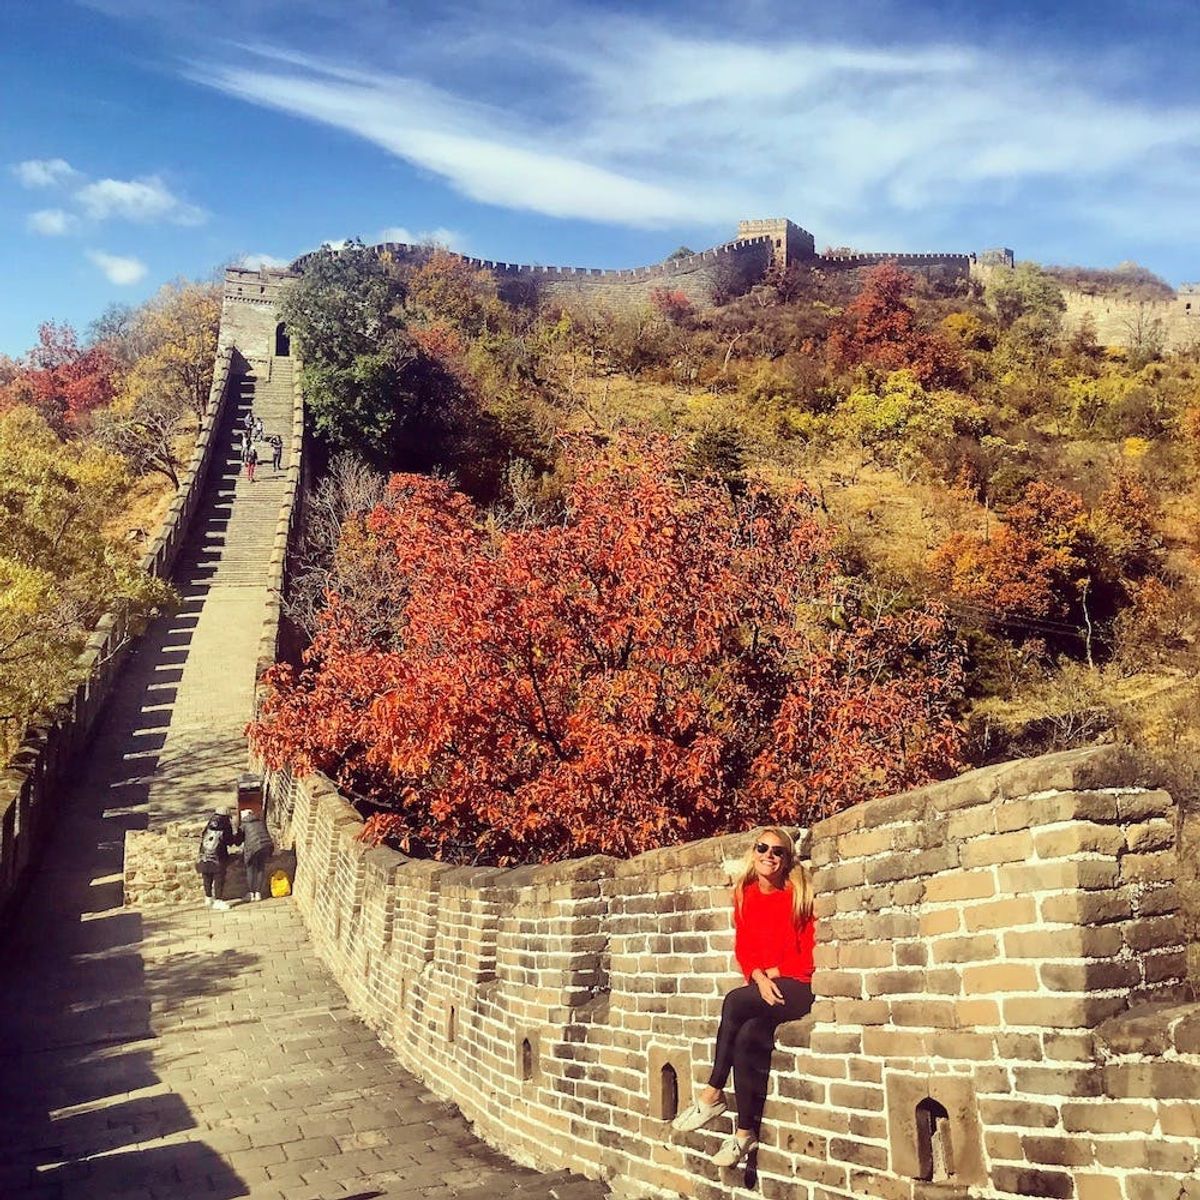 How I Discovered a New Perspective Along the Great Wall of China